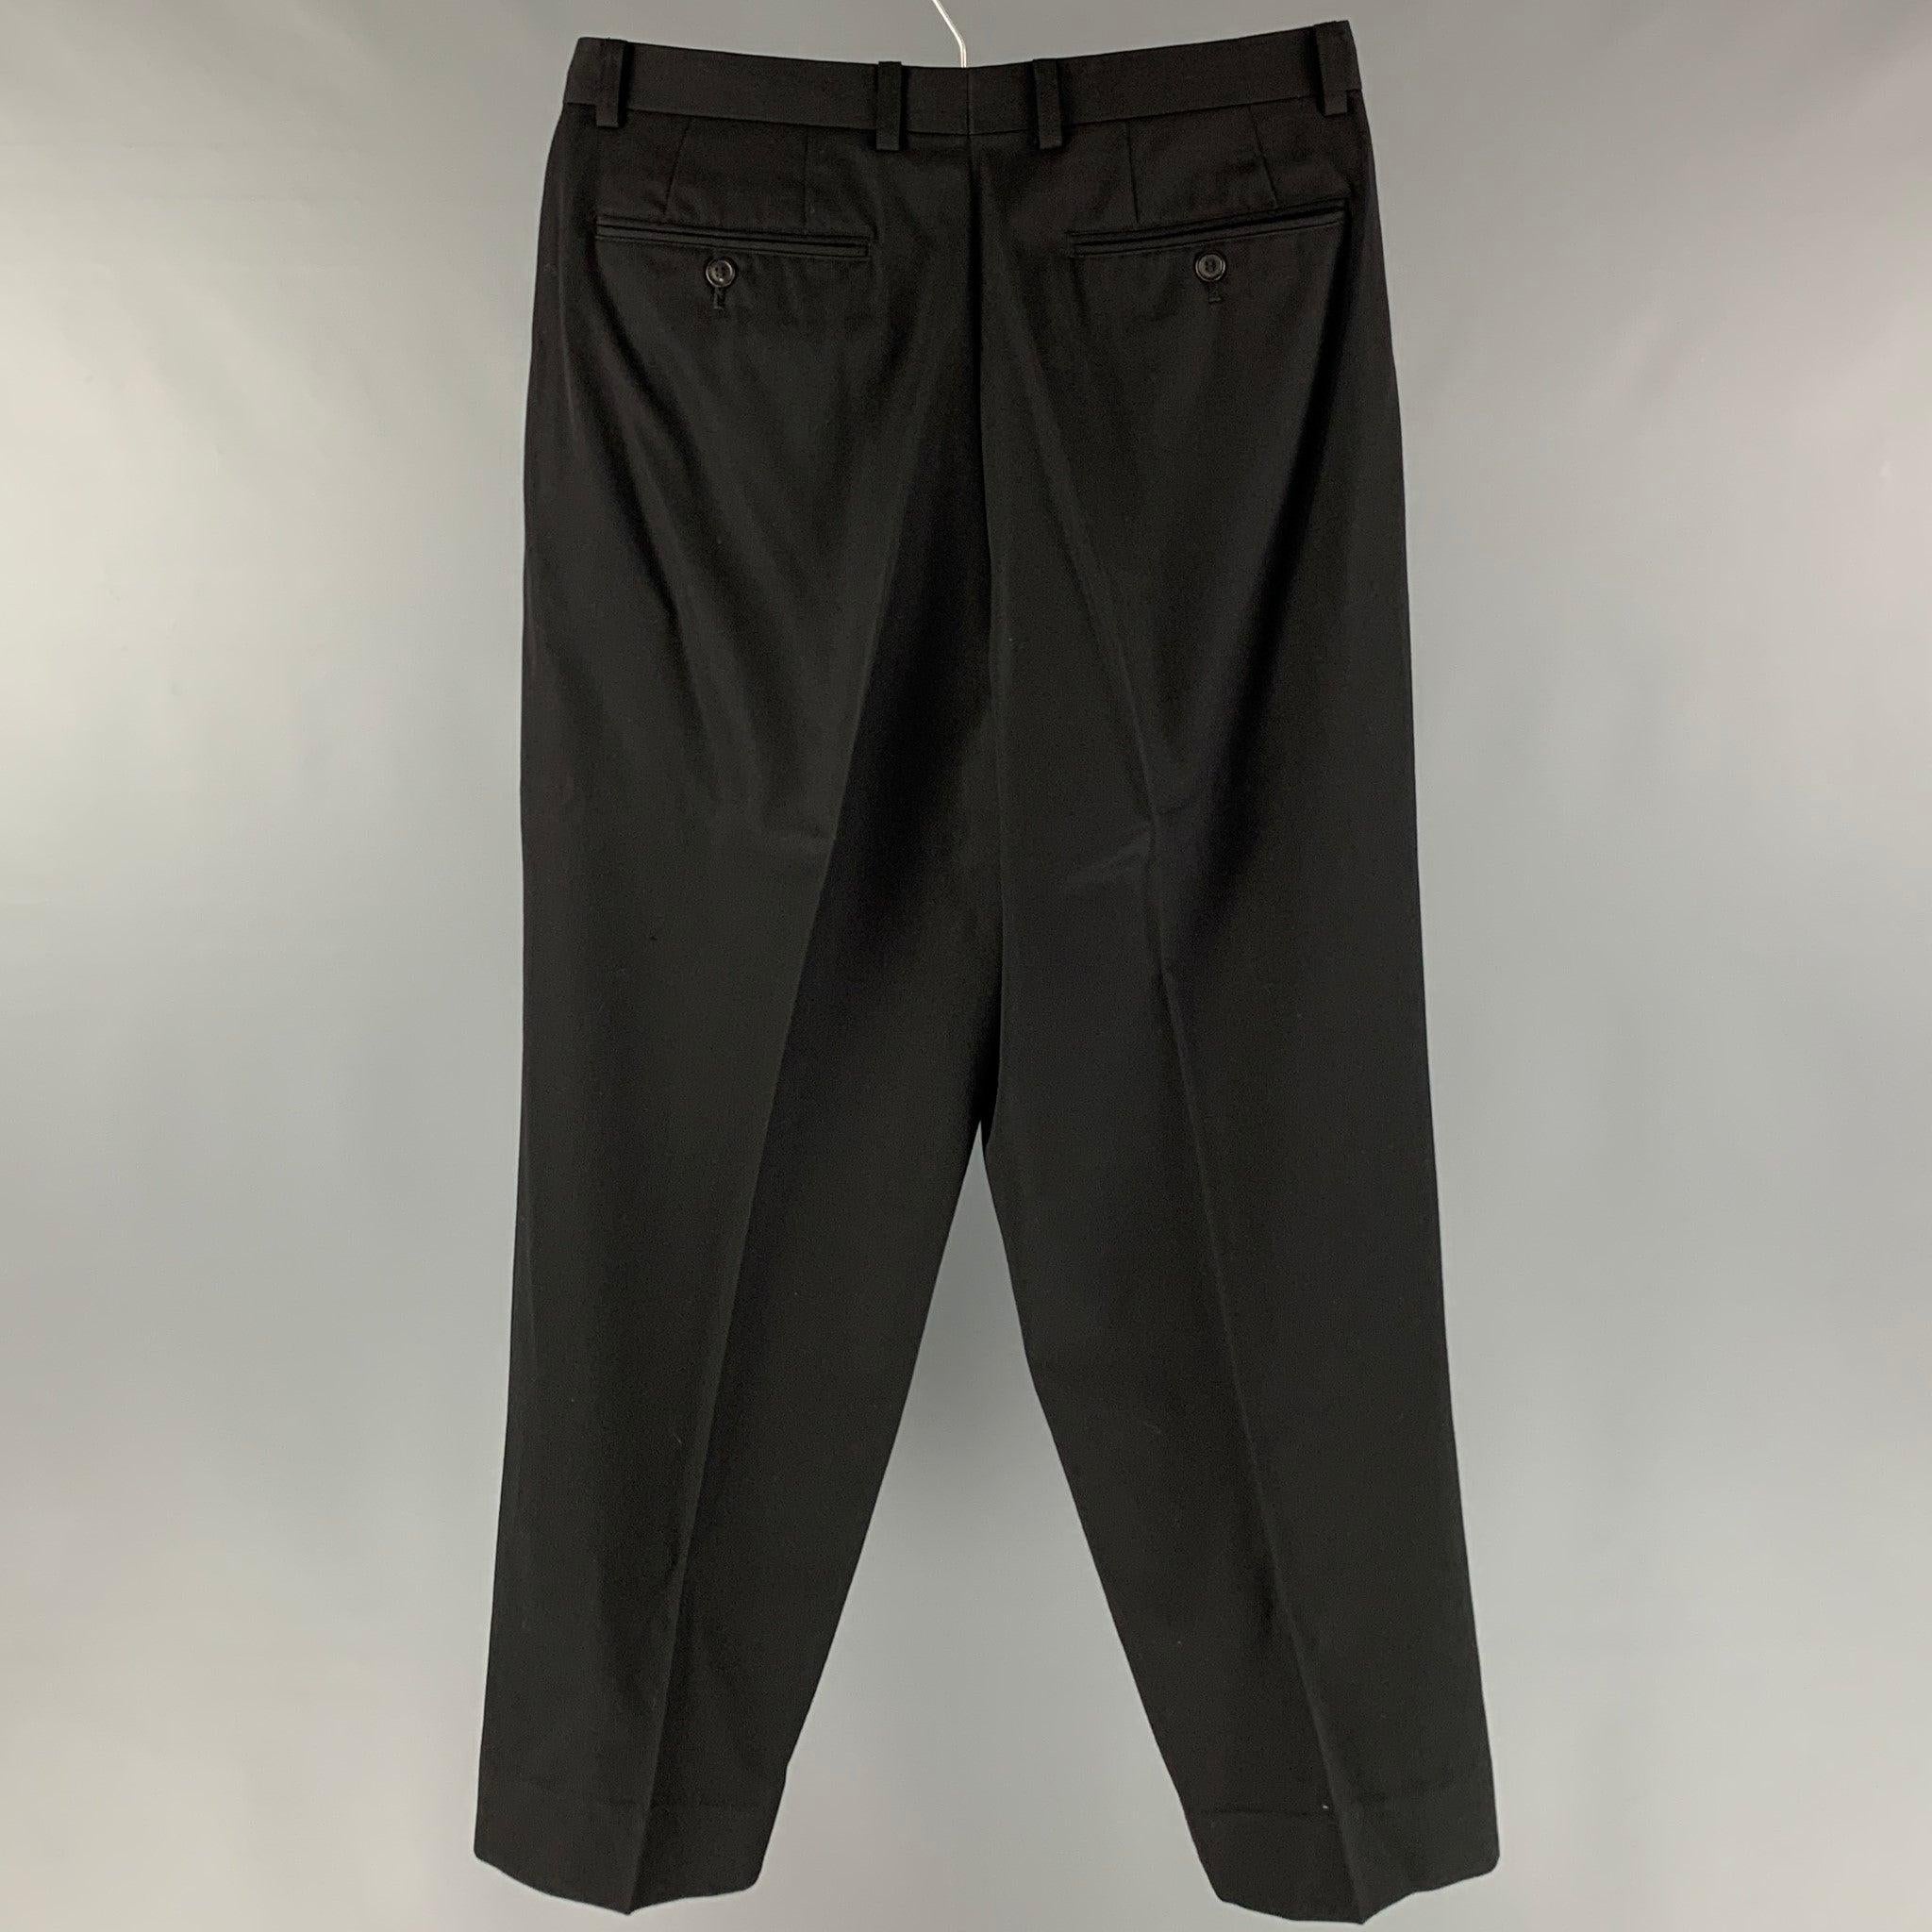 ISSEY MIYAKE dress pants comes in a black wool featuring a pleated style, and a zip fly closure. Made in Japan.Excellent Pre-Owned Condition. 

Marked:  S 

Measurements: 
 Waist: 32 inches Rise: 12 inches Inseam: 29 inches Leg Opening: 18 inches 
